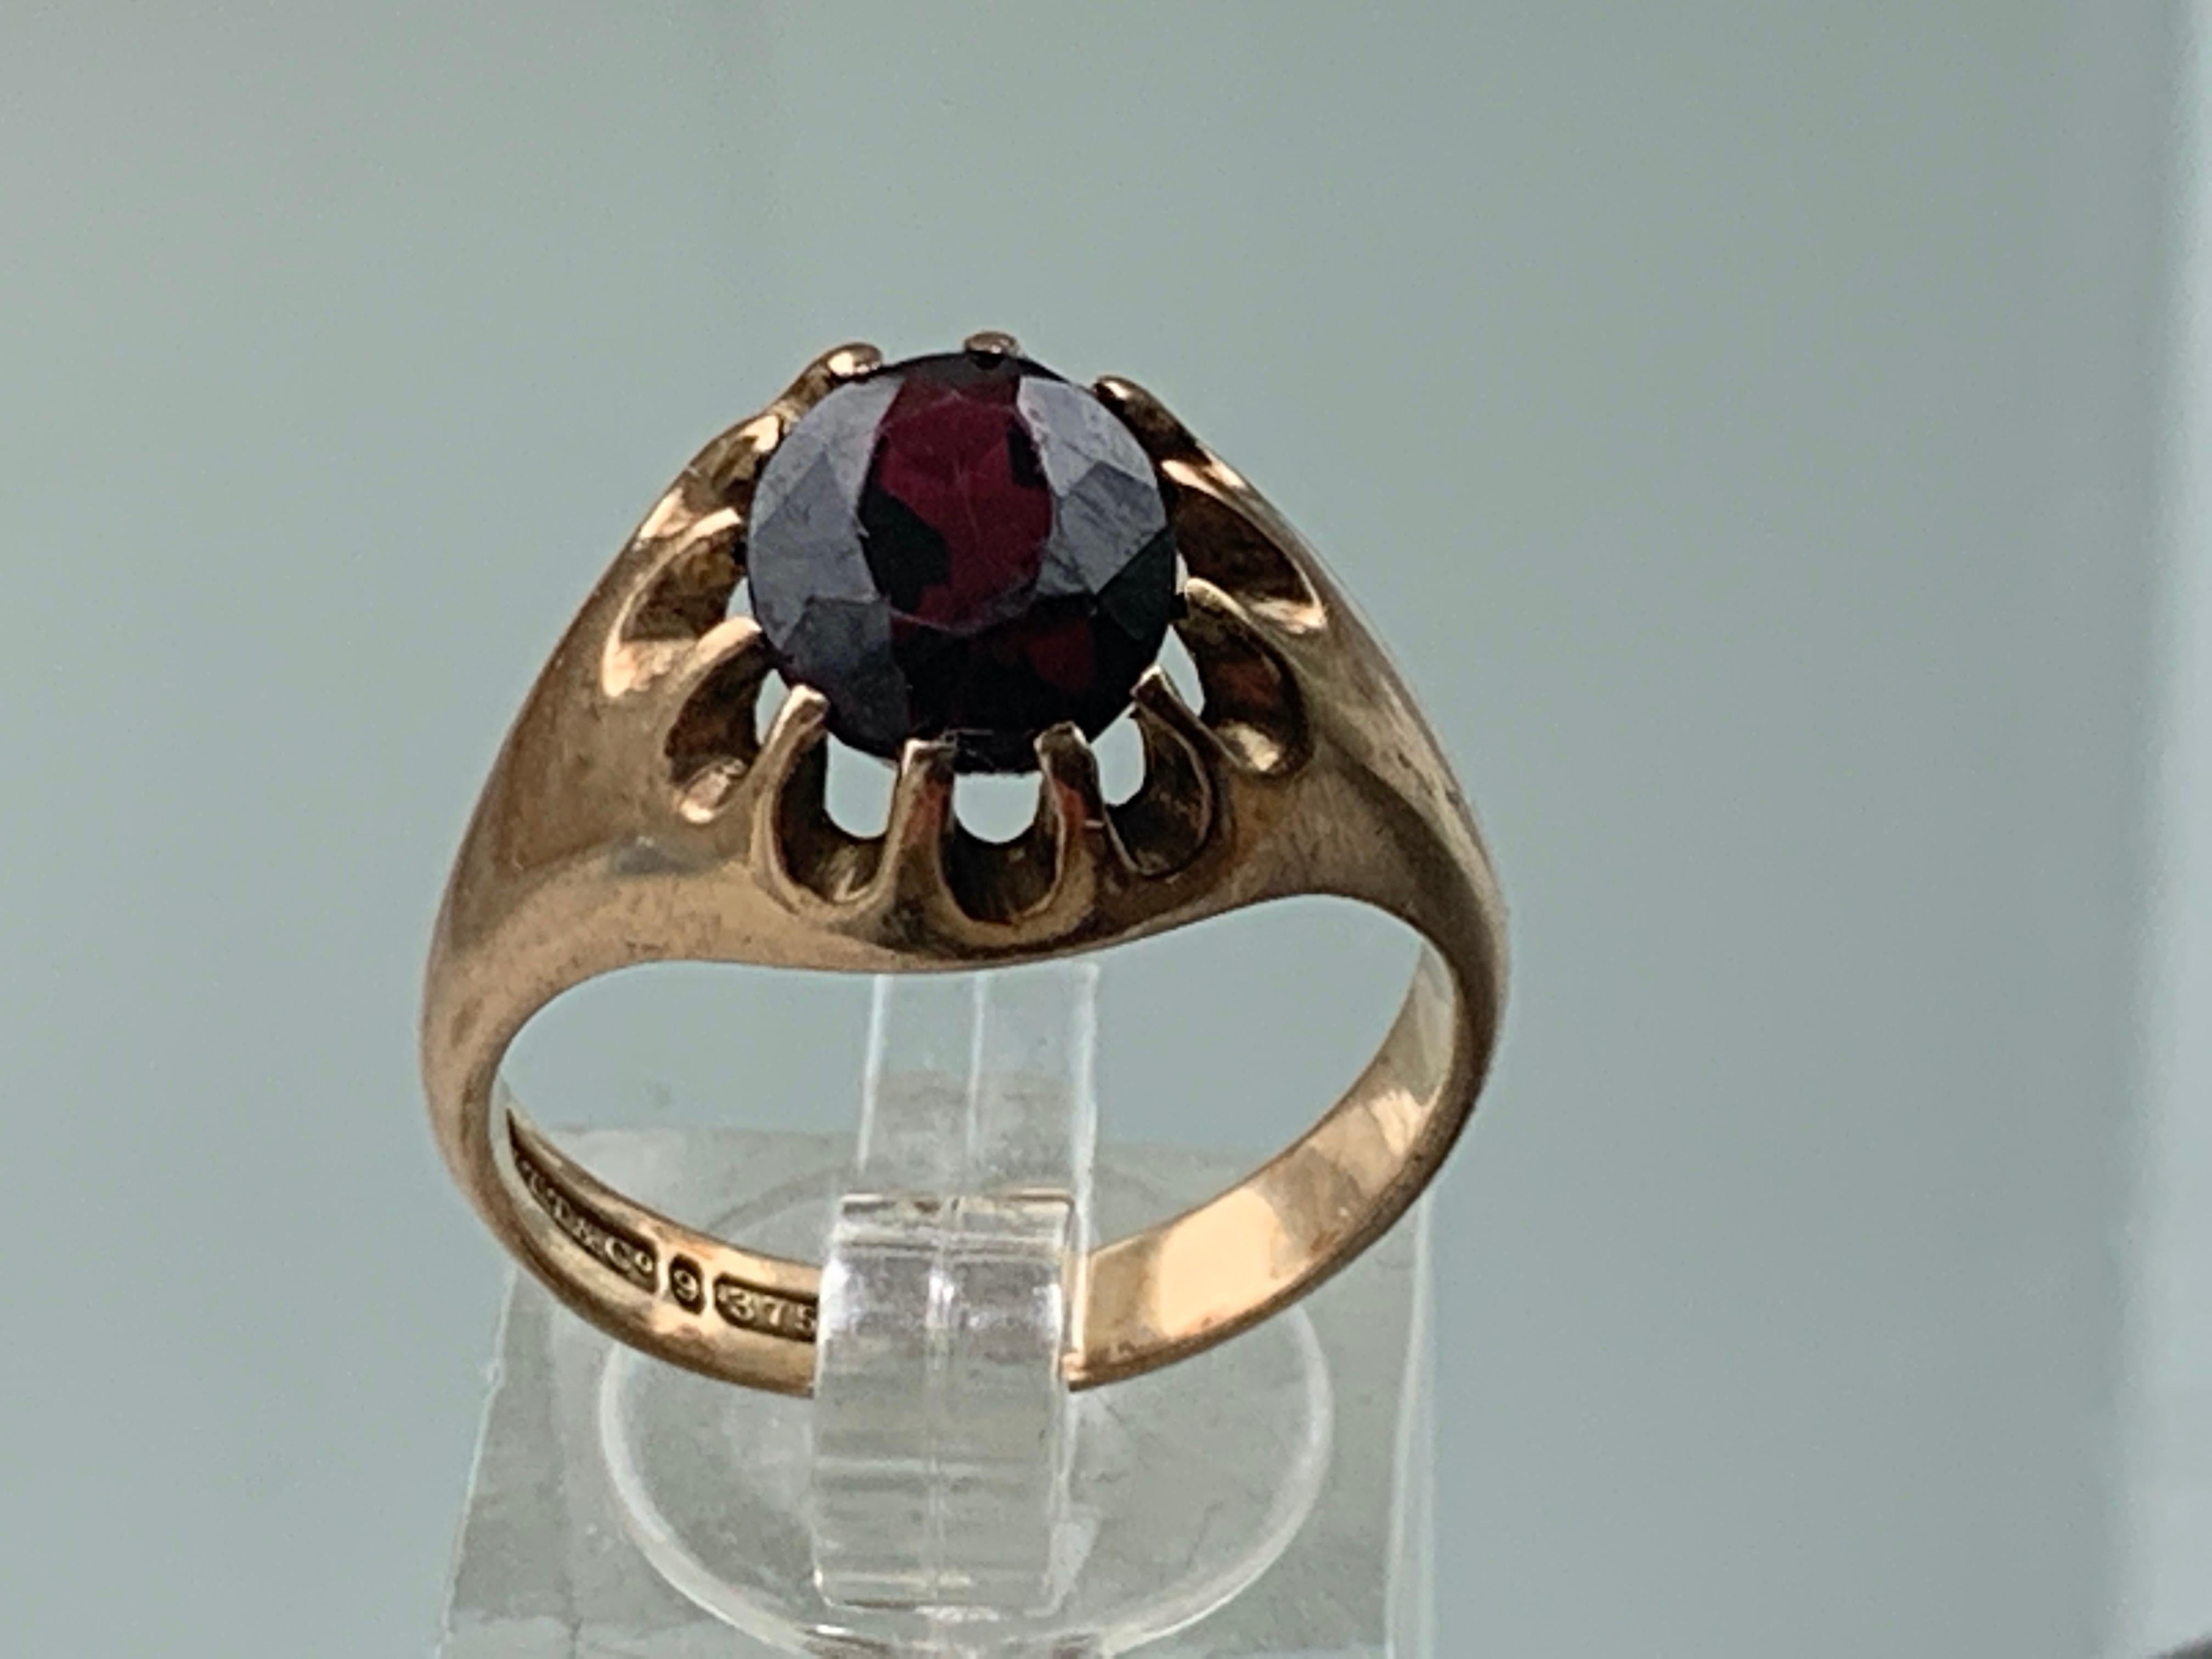 Vintage 9ct Gold Garnet Ring
with Unknown red stone
by W.T Toghill & Co.
dated 1956

U.K Size Q
U.S Size  8

inner diameter is 18.19mm

